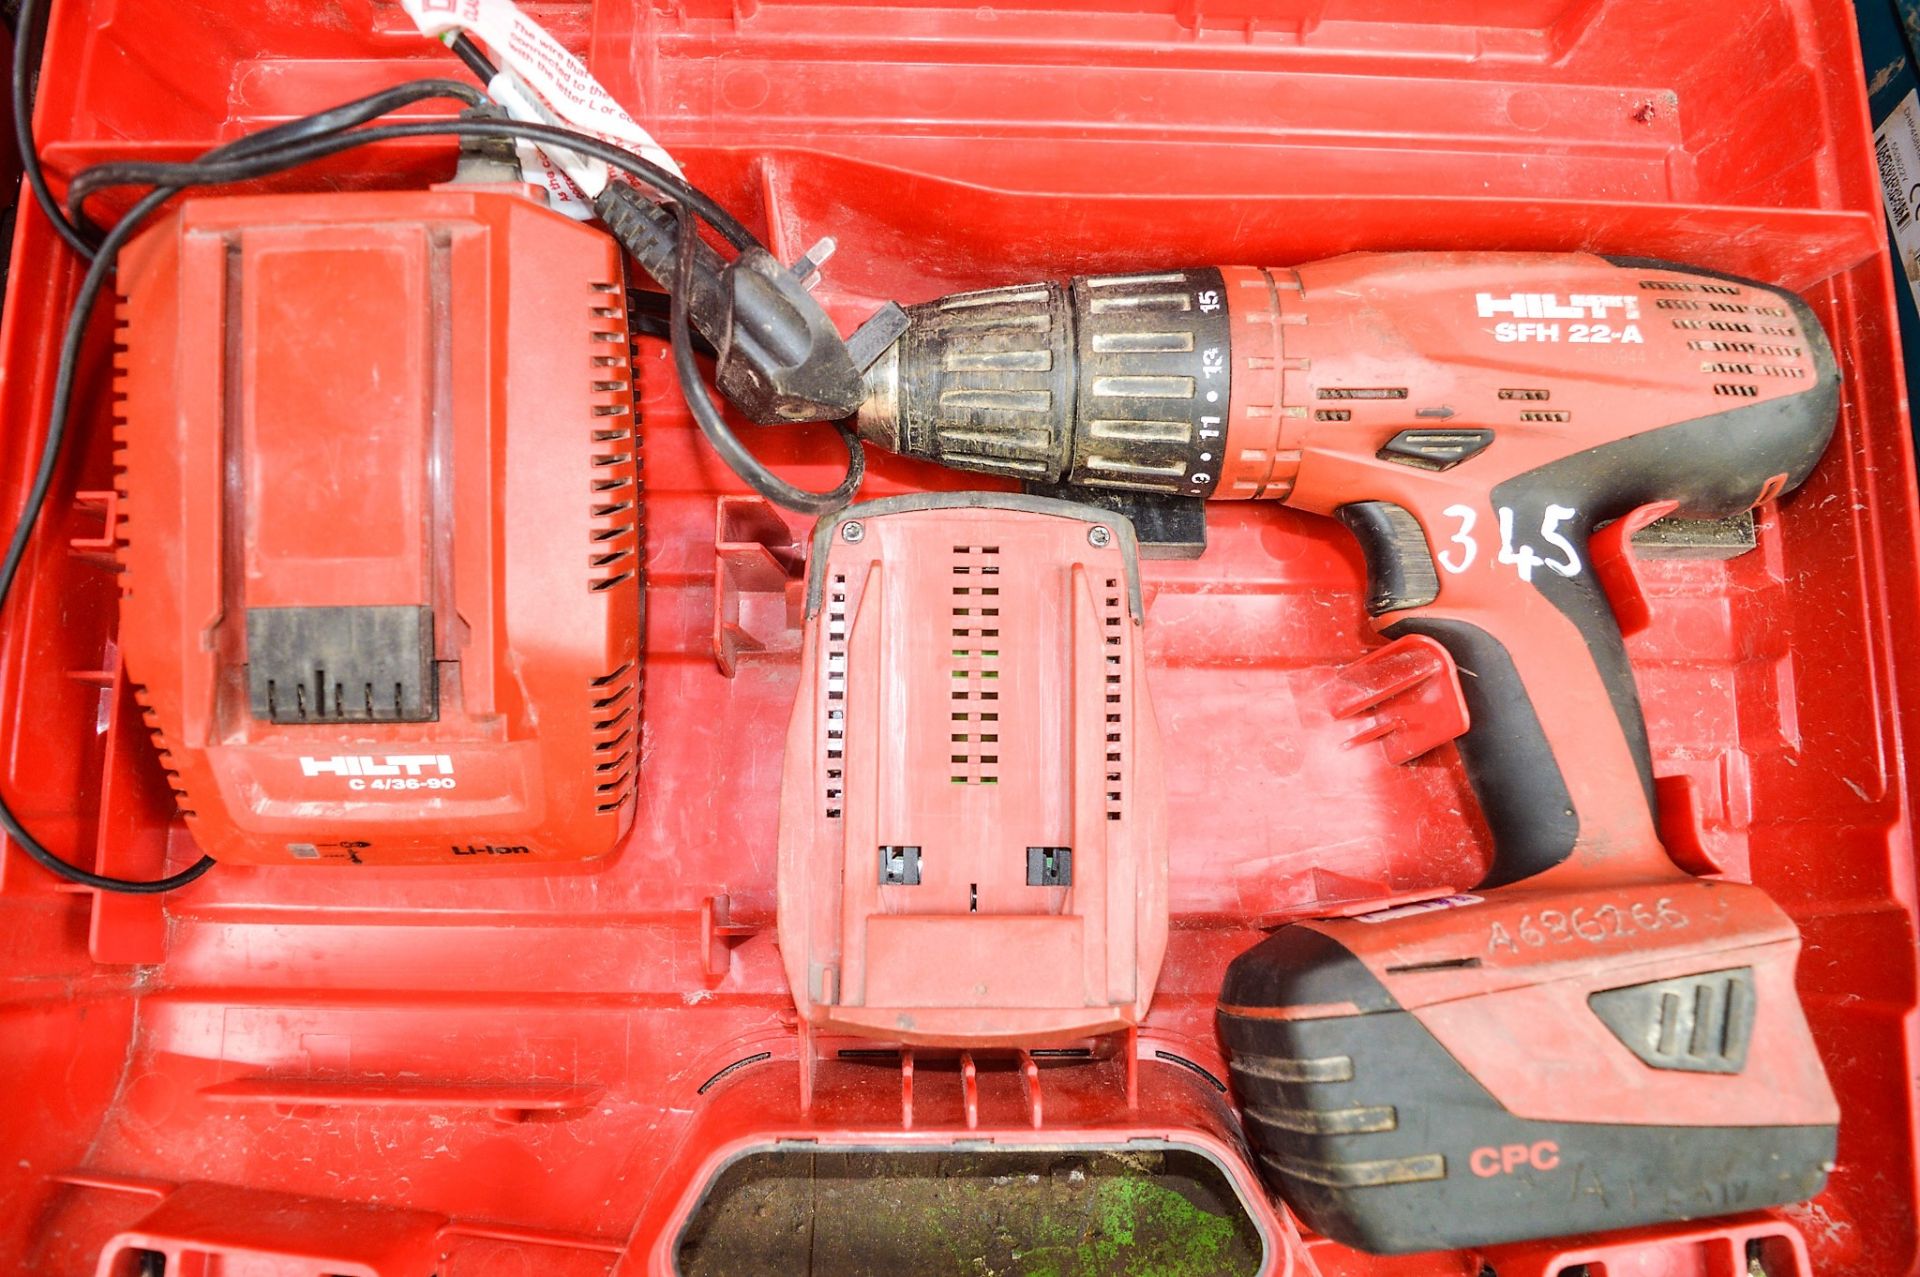 Hilti SFH22-A 22v cordless power drill c/w charger, 2 batteries & carry case A686266